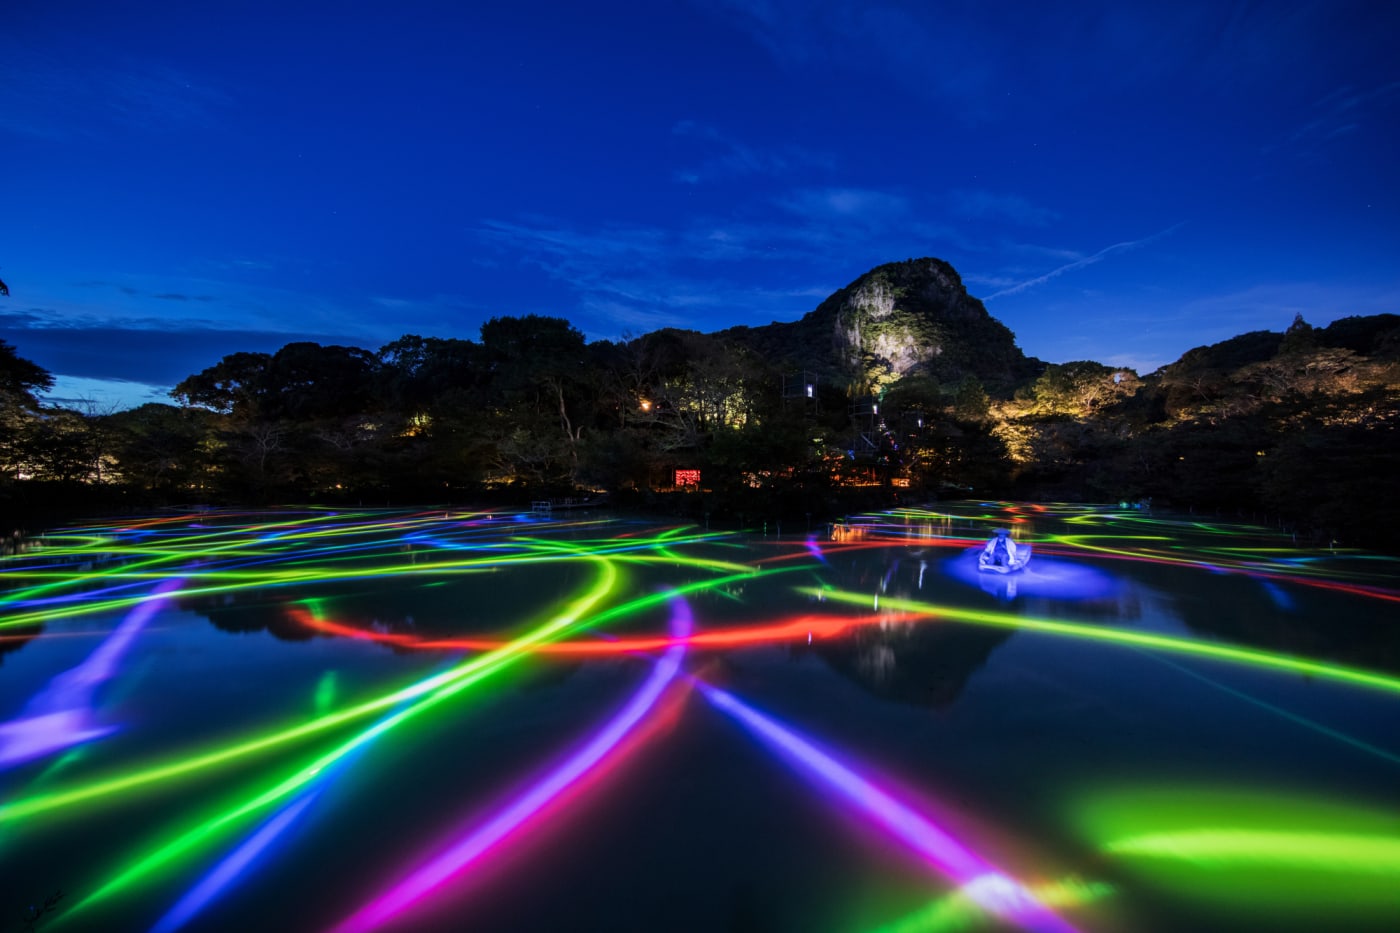 Outside installation: Set on a large pond/lake with the backdrops of mountains is the light projection of fish - in particular the bright rainbow coloured paths they, and the boats, have made.